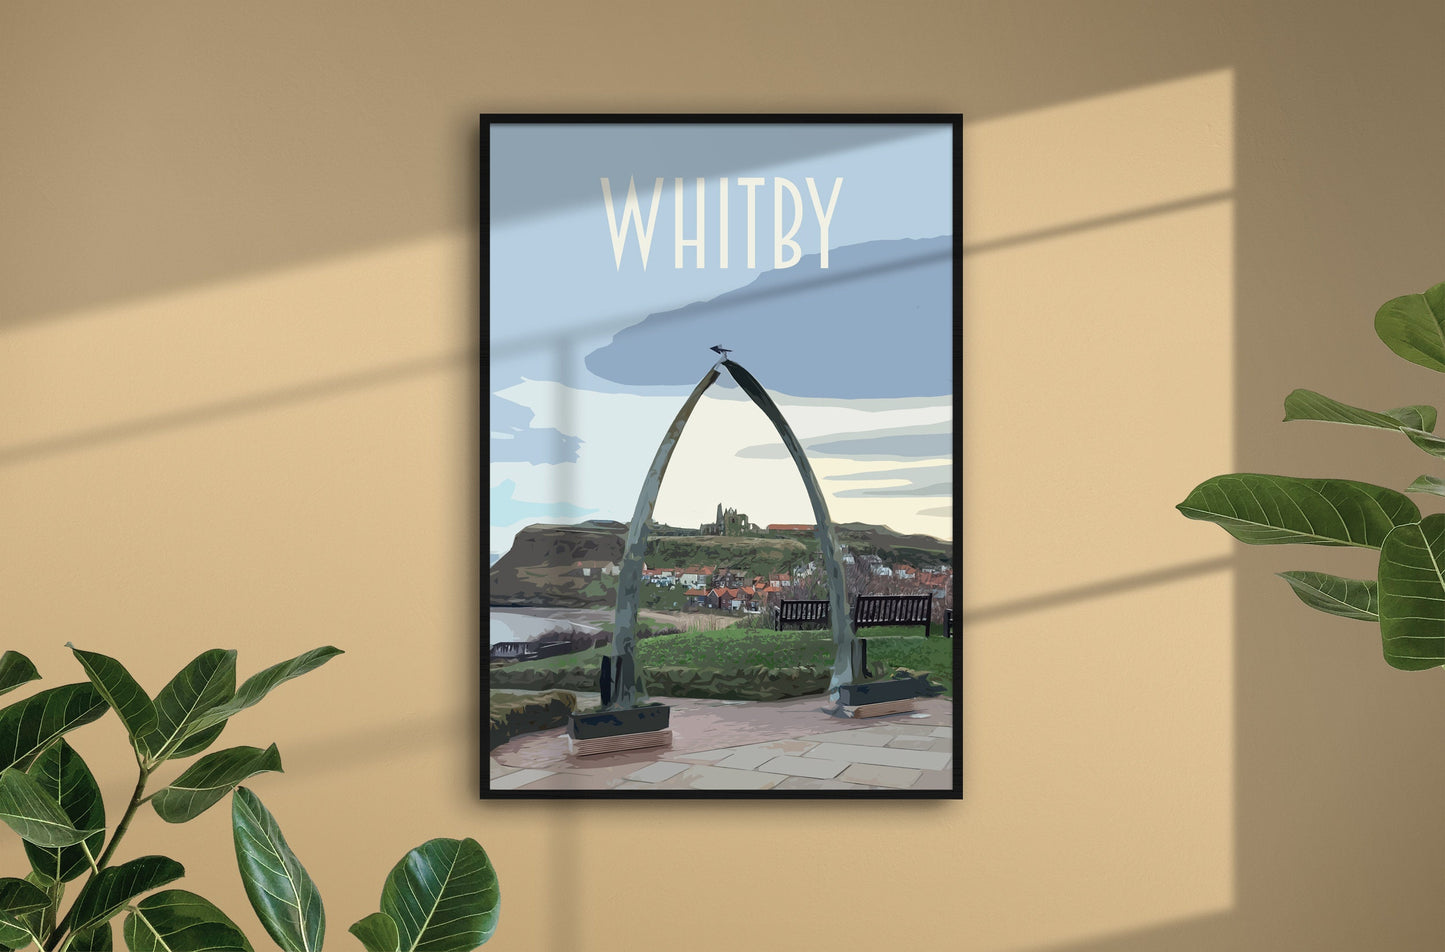 Whitby Travel Poster